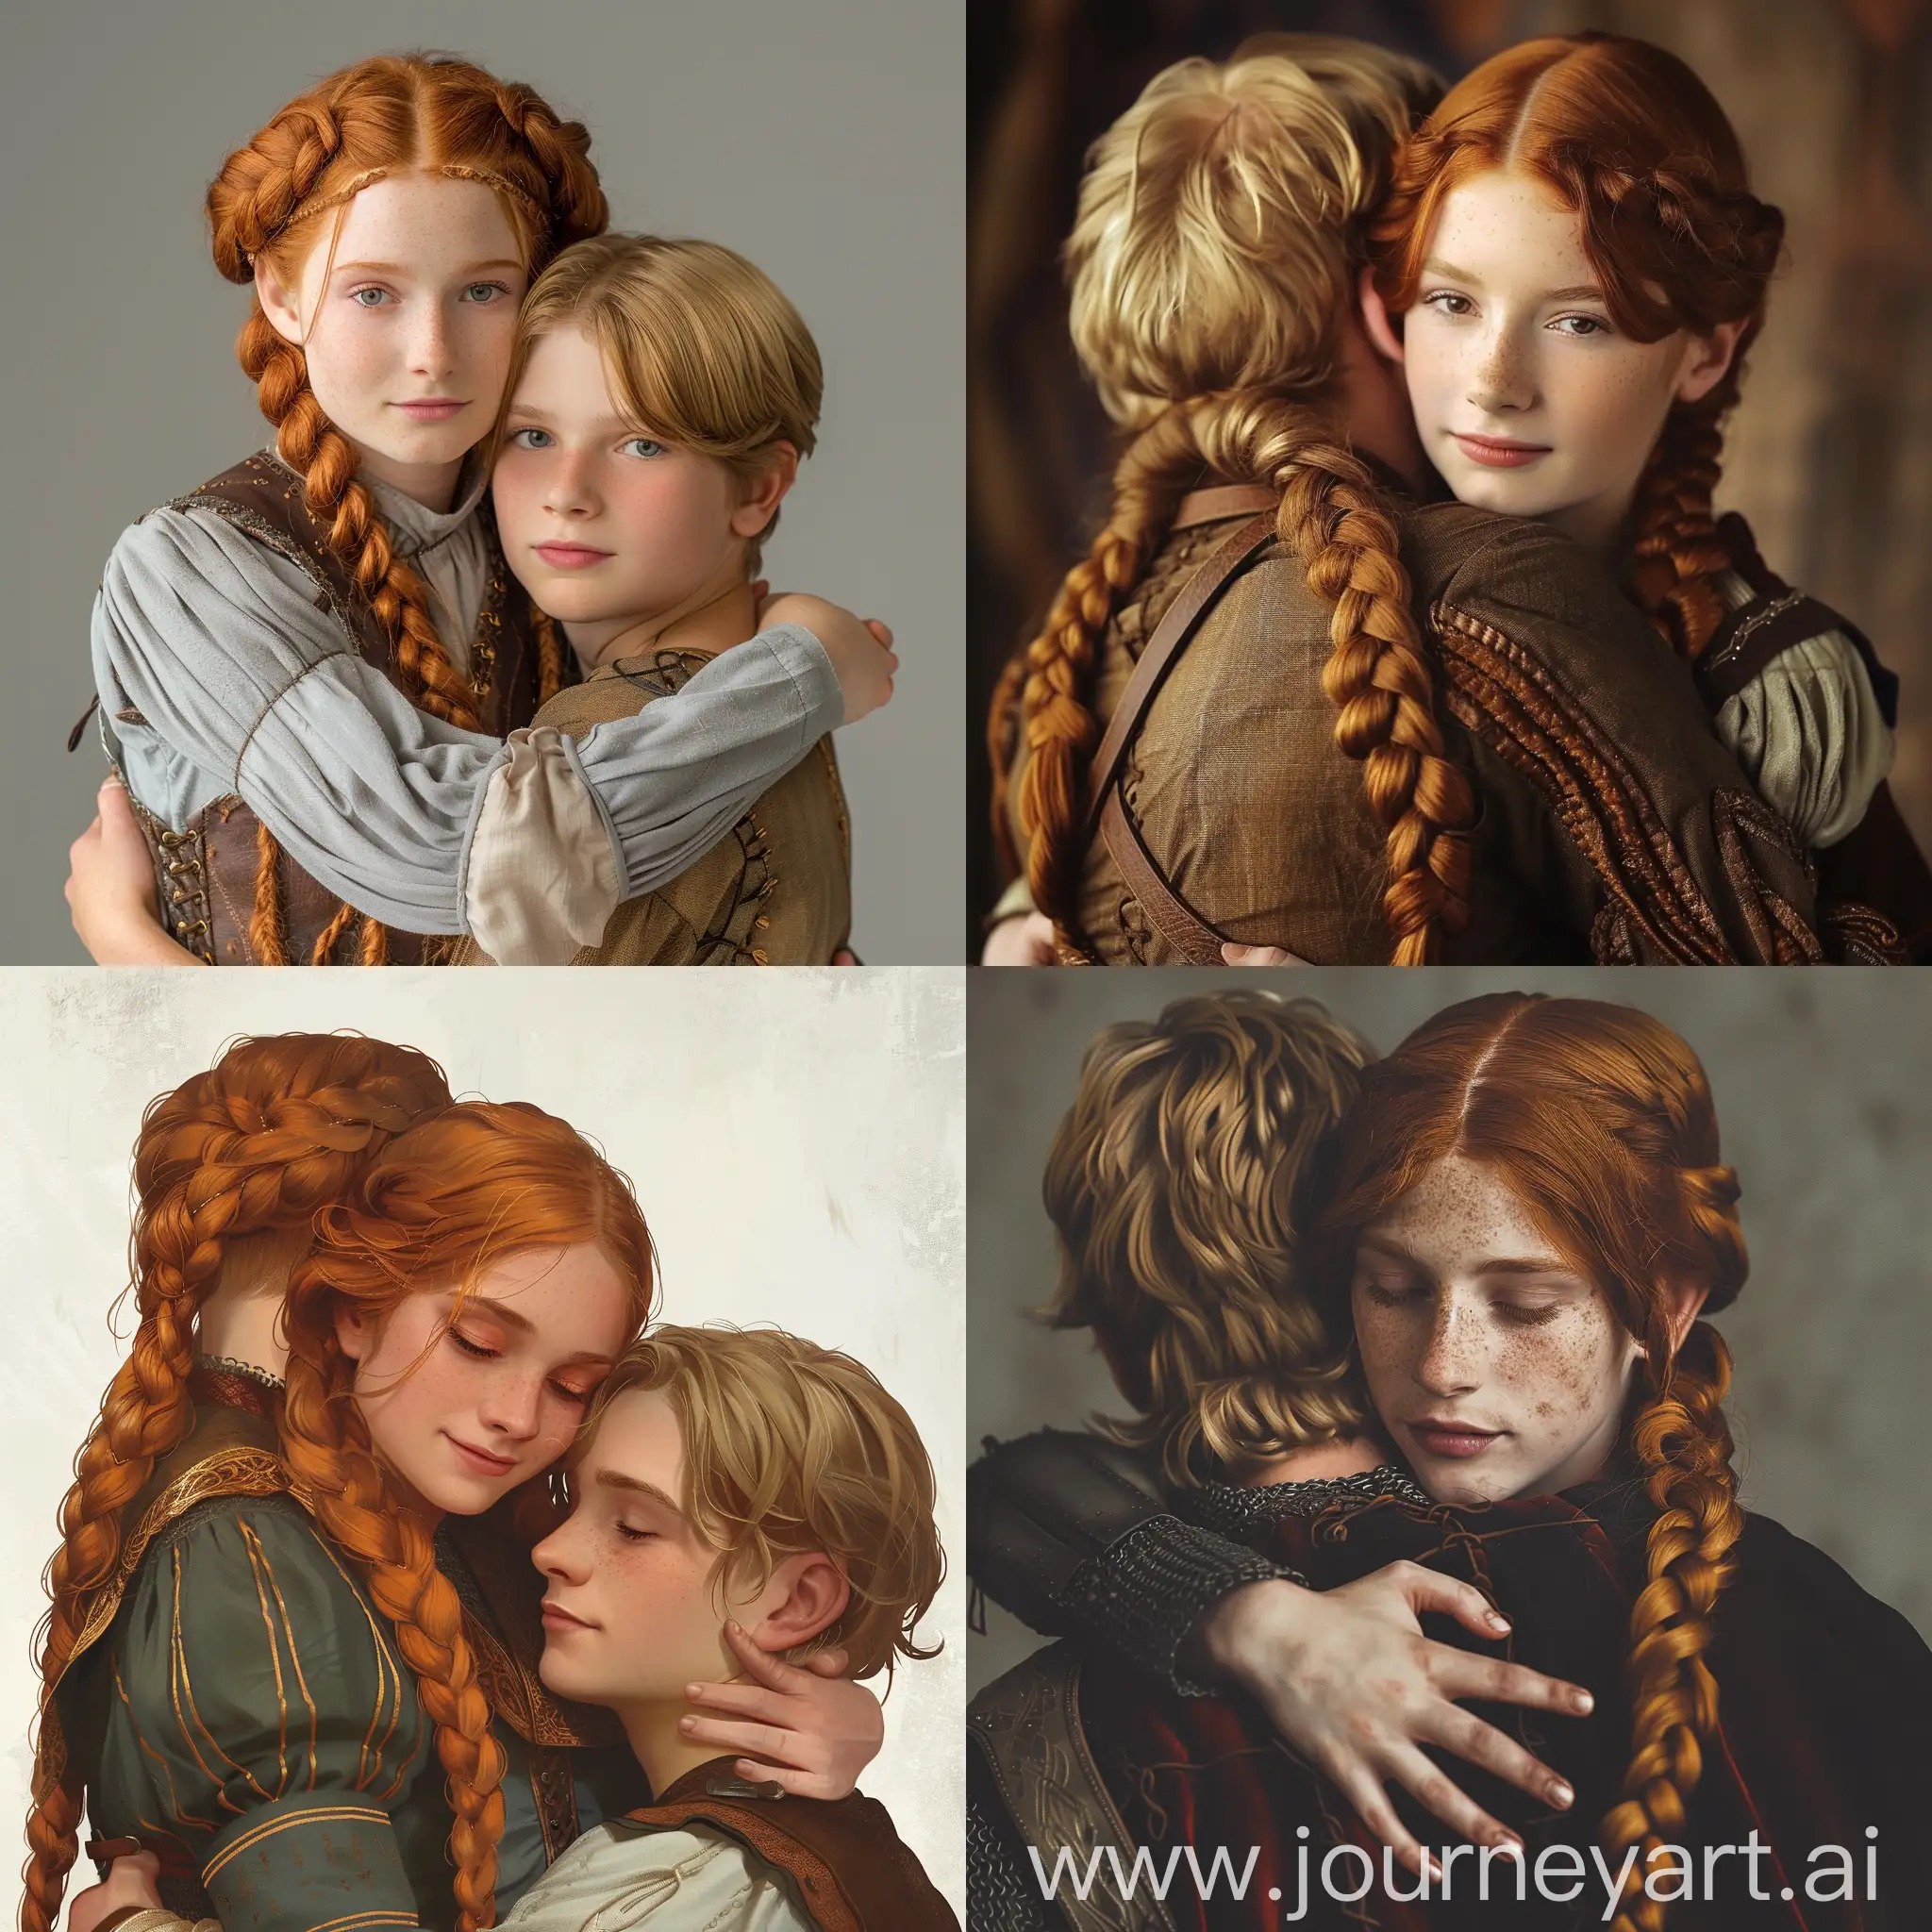 Seductive-GingerHaired-Maiden-Embraces-Blond-Youth-Medieval-Romance-Novel-Cover-Art